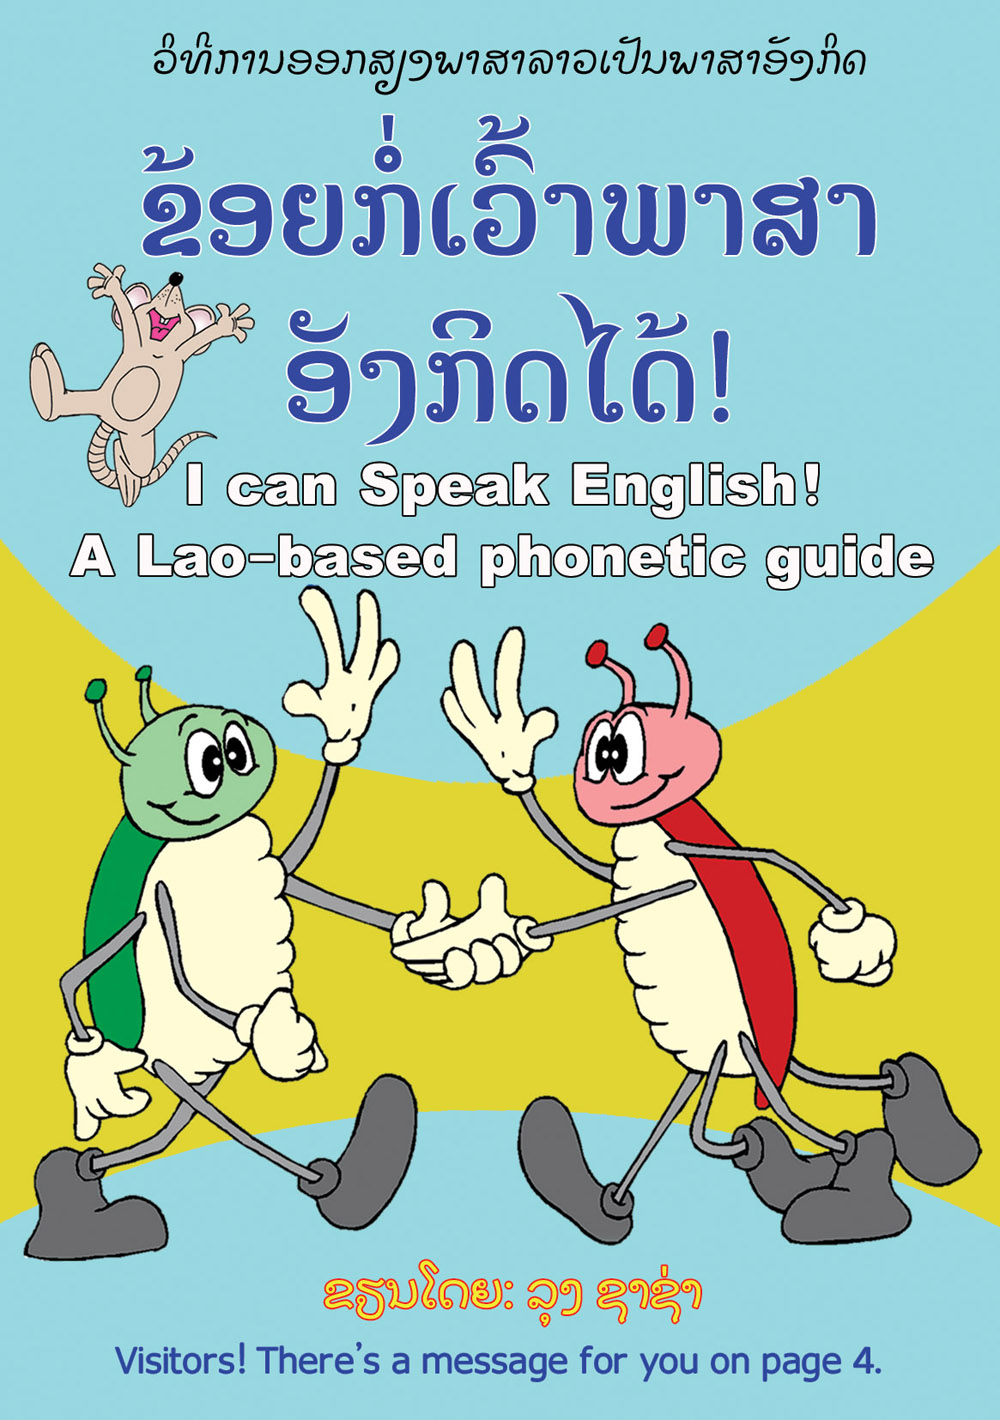 I Can Speak English! large book cover, published in Lao and English